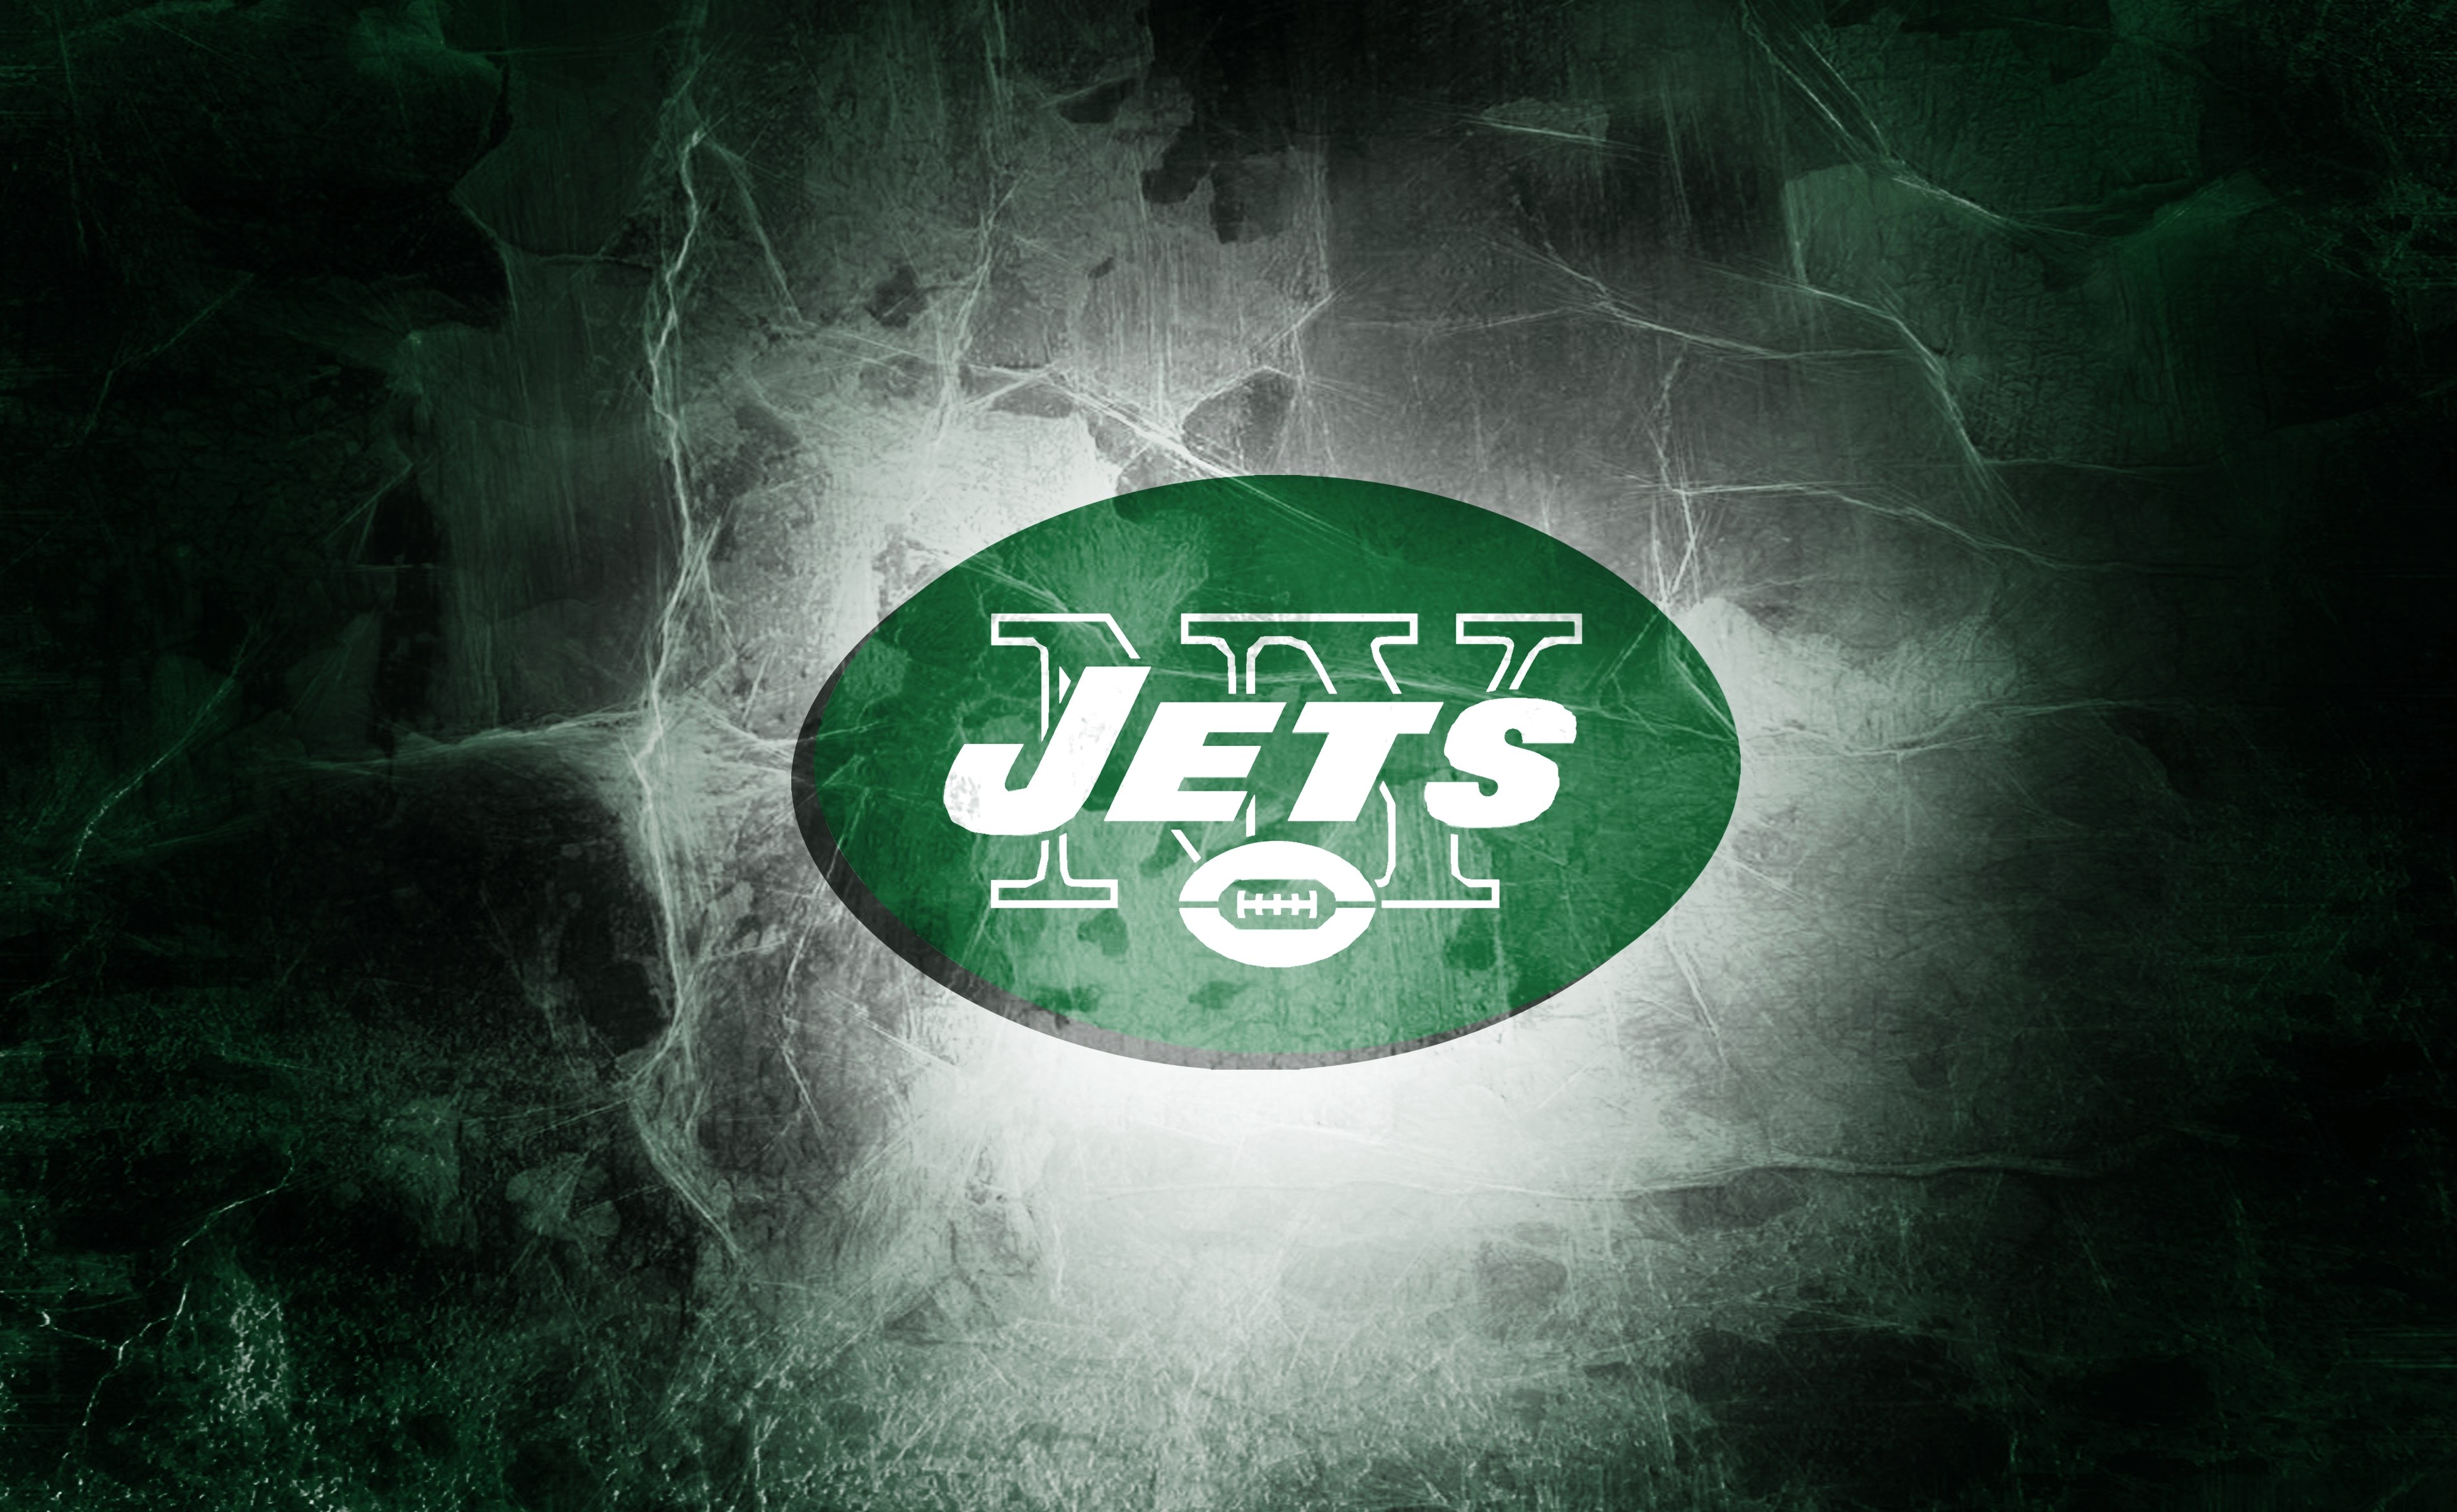 10 Best New York Jets Wall Paper FULL HD 1080p For PC Background